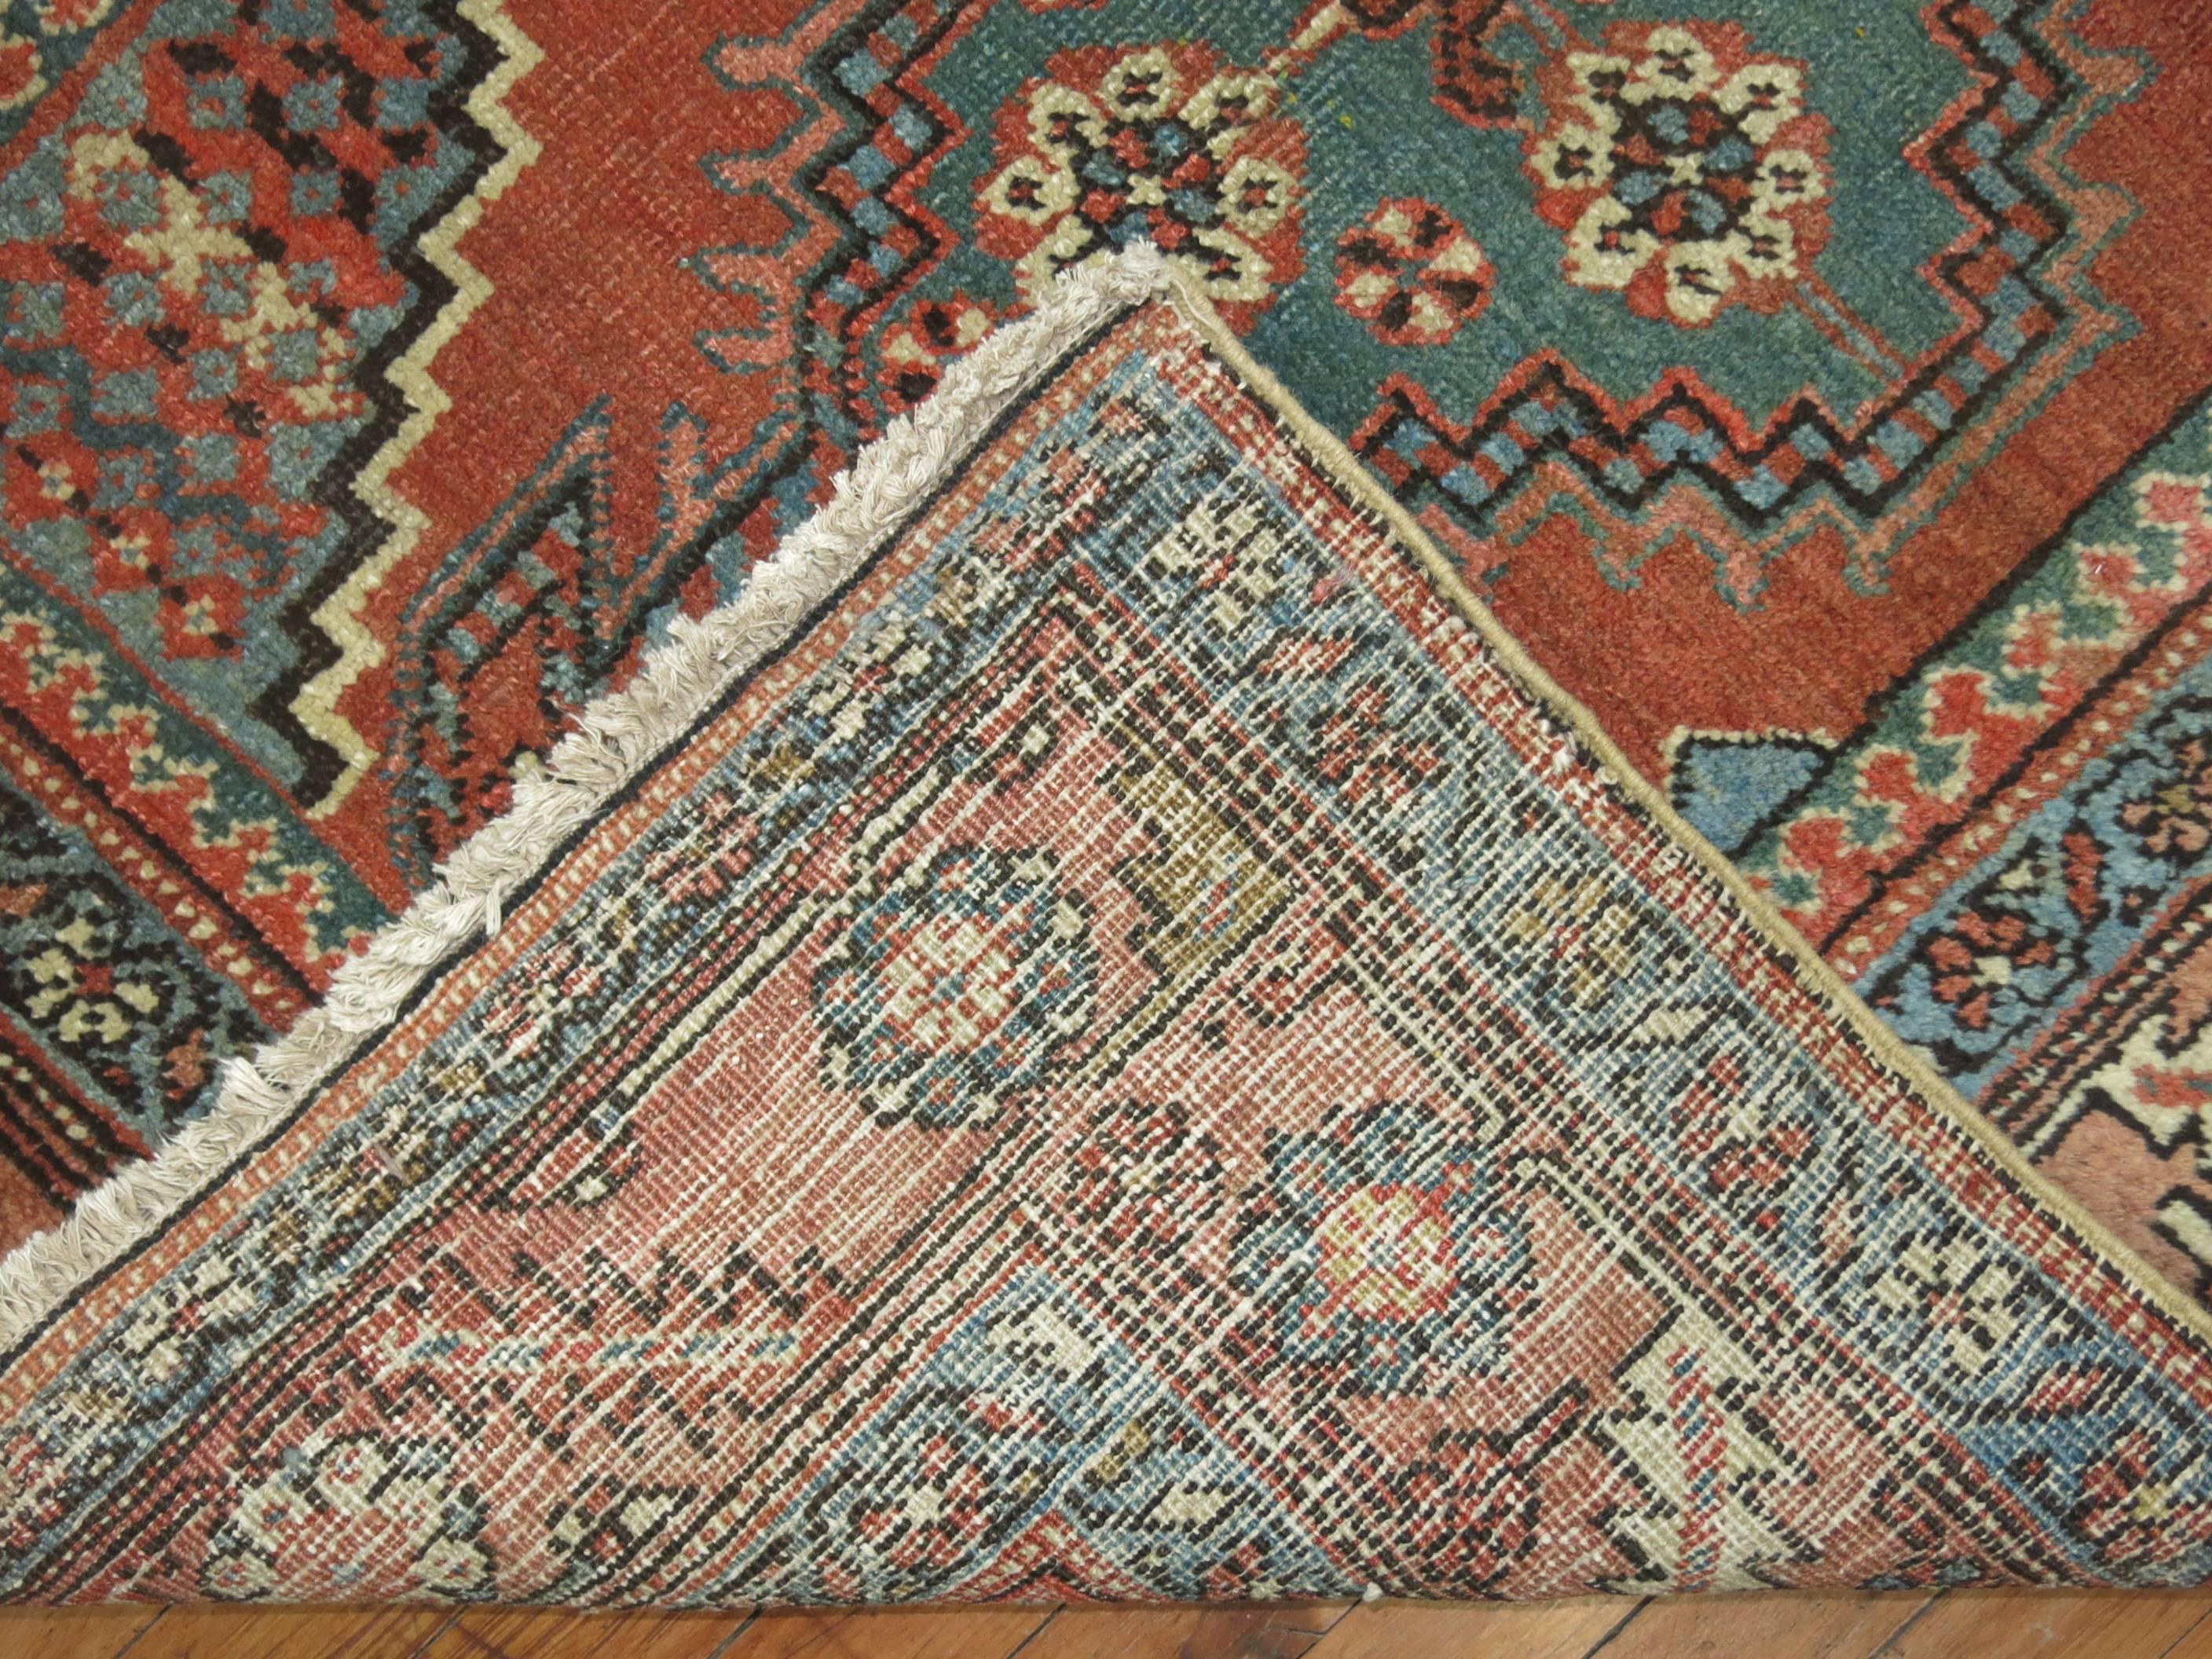 A hard to find, authentic one-of-a-kind antique Persian Heriz wide runner in rustic tones.